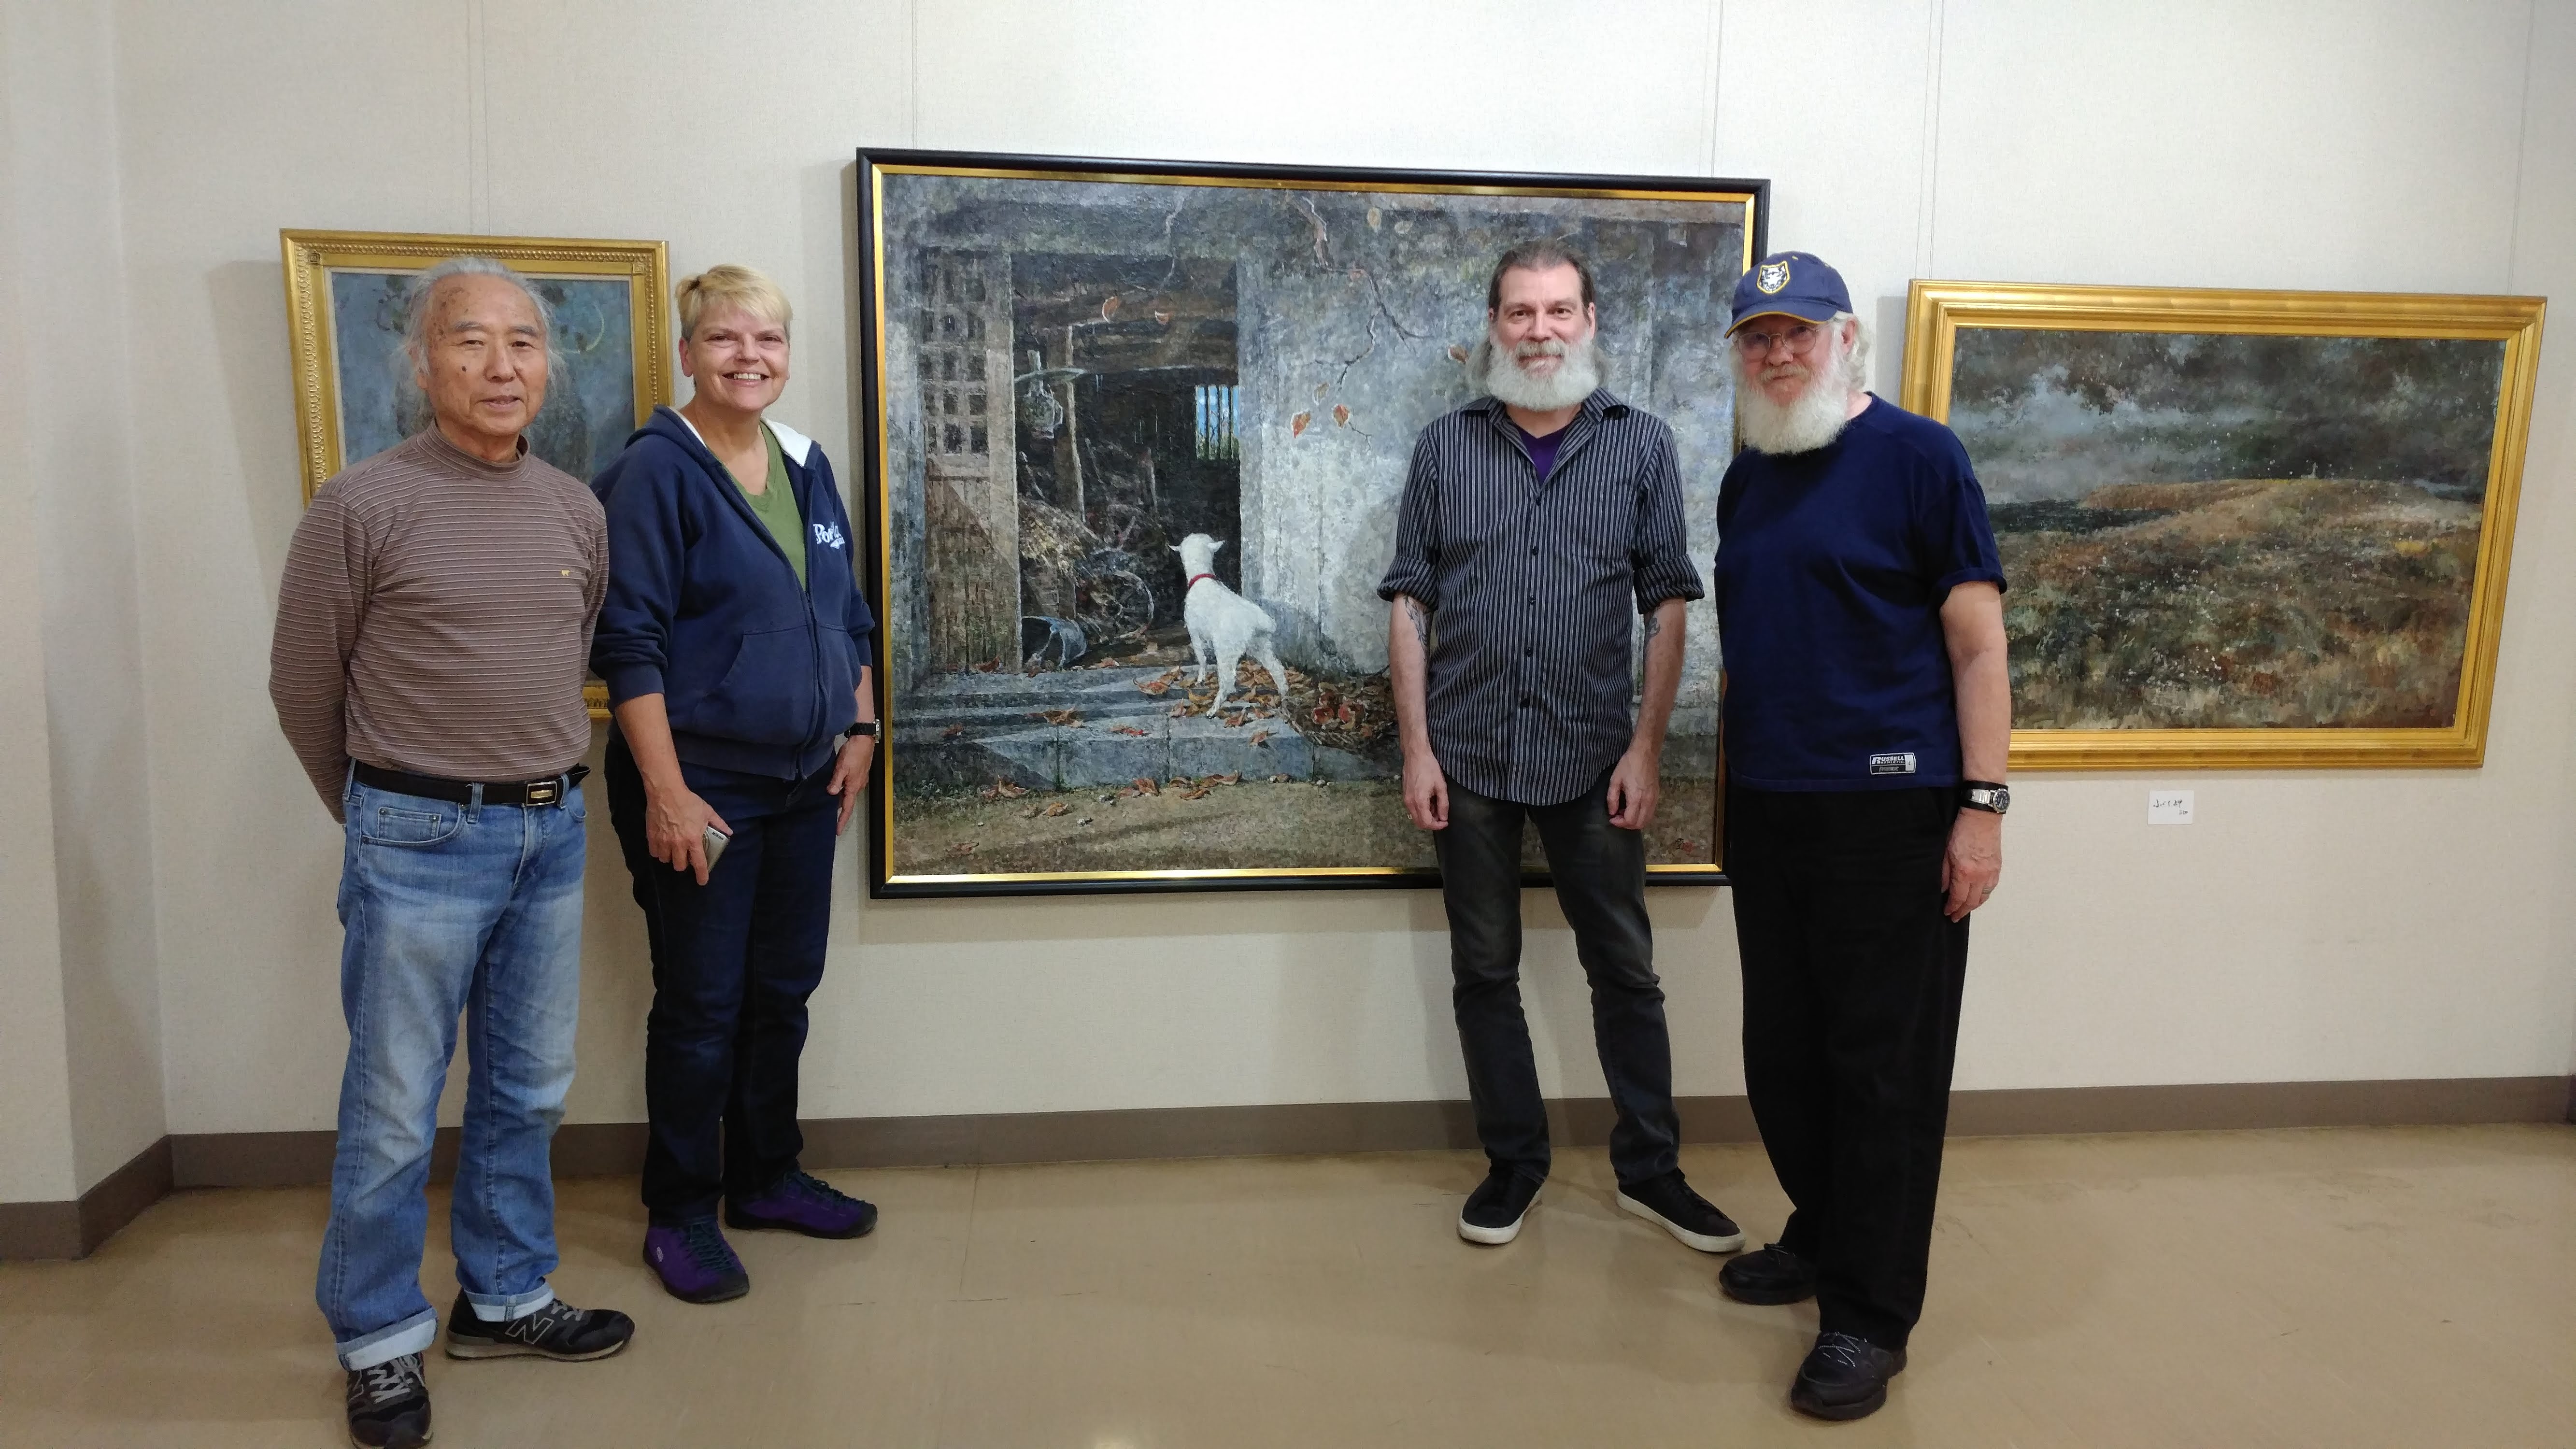 the artist, Brenda, Earl, and Chris stand in front of a painting of a goat looking into the entrance of a small stone building